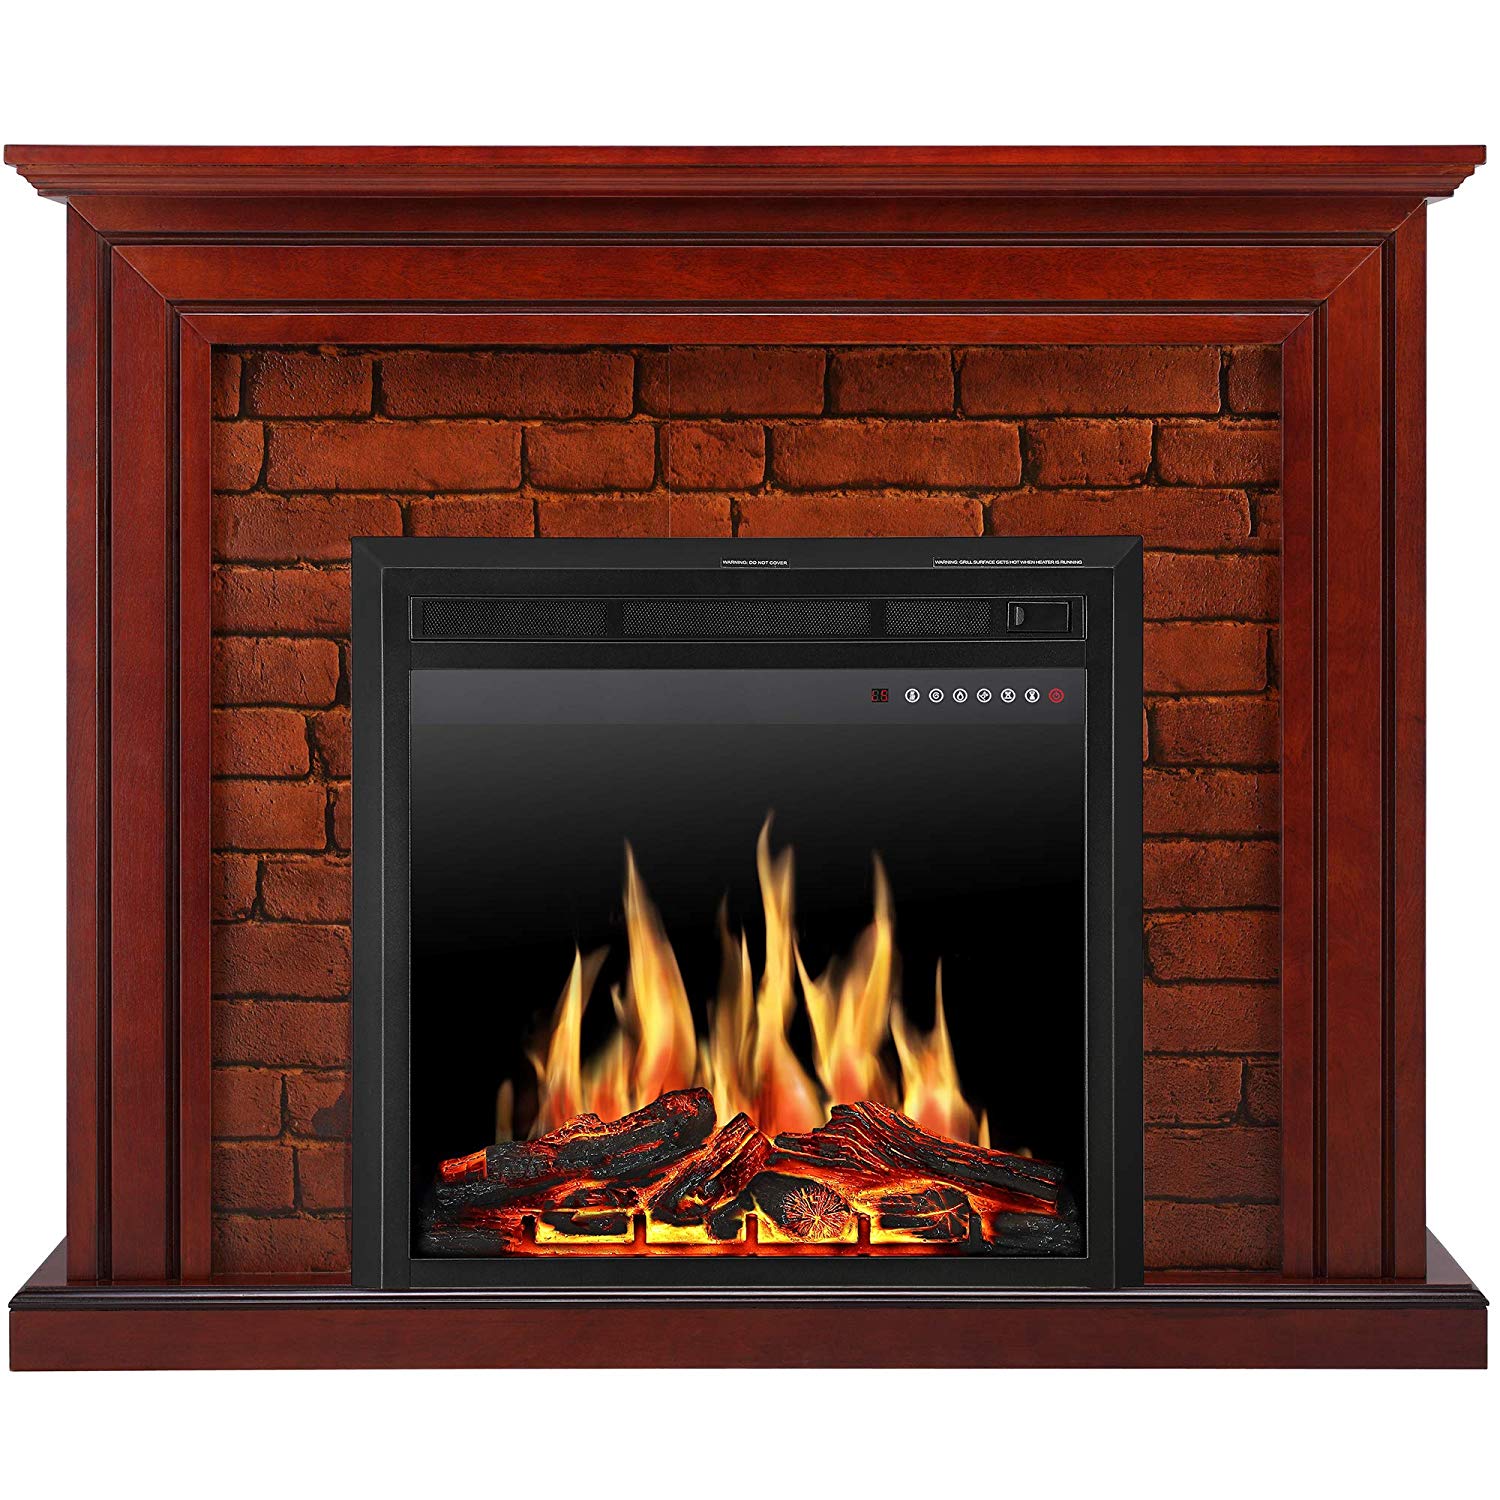 Corner Electric Fireplace with Mantel Unique Jamfly Electric Fireplace Mantel Package Traditional Brick Wall Design Heater with Remote Control and Led touch Screen Home Accent Furnishings